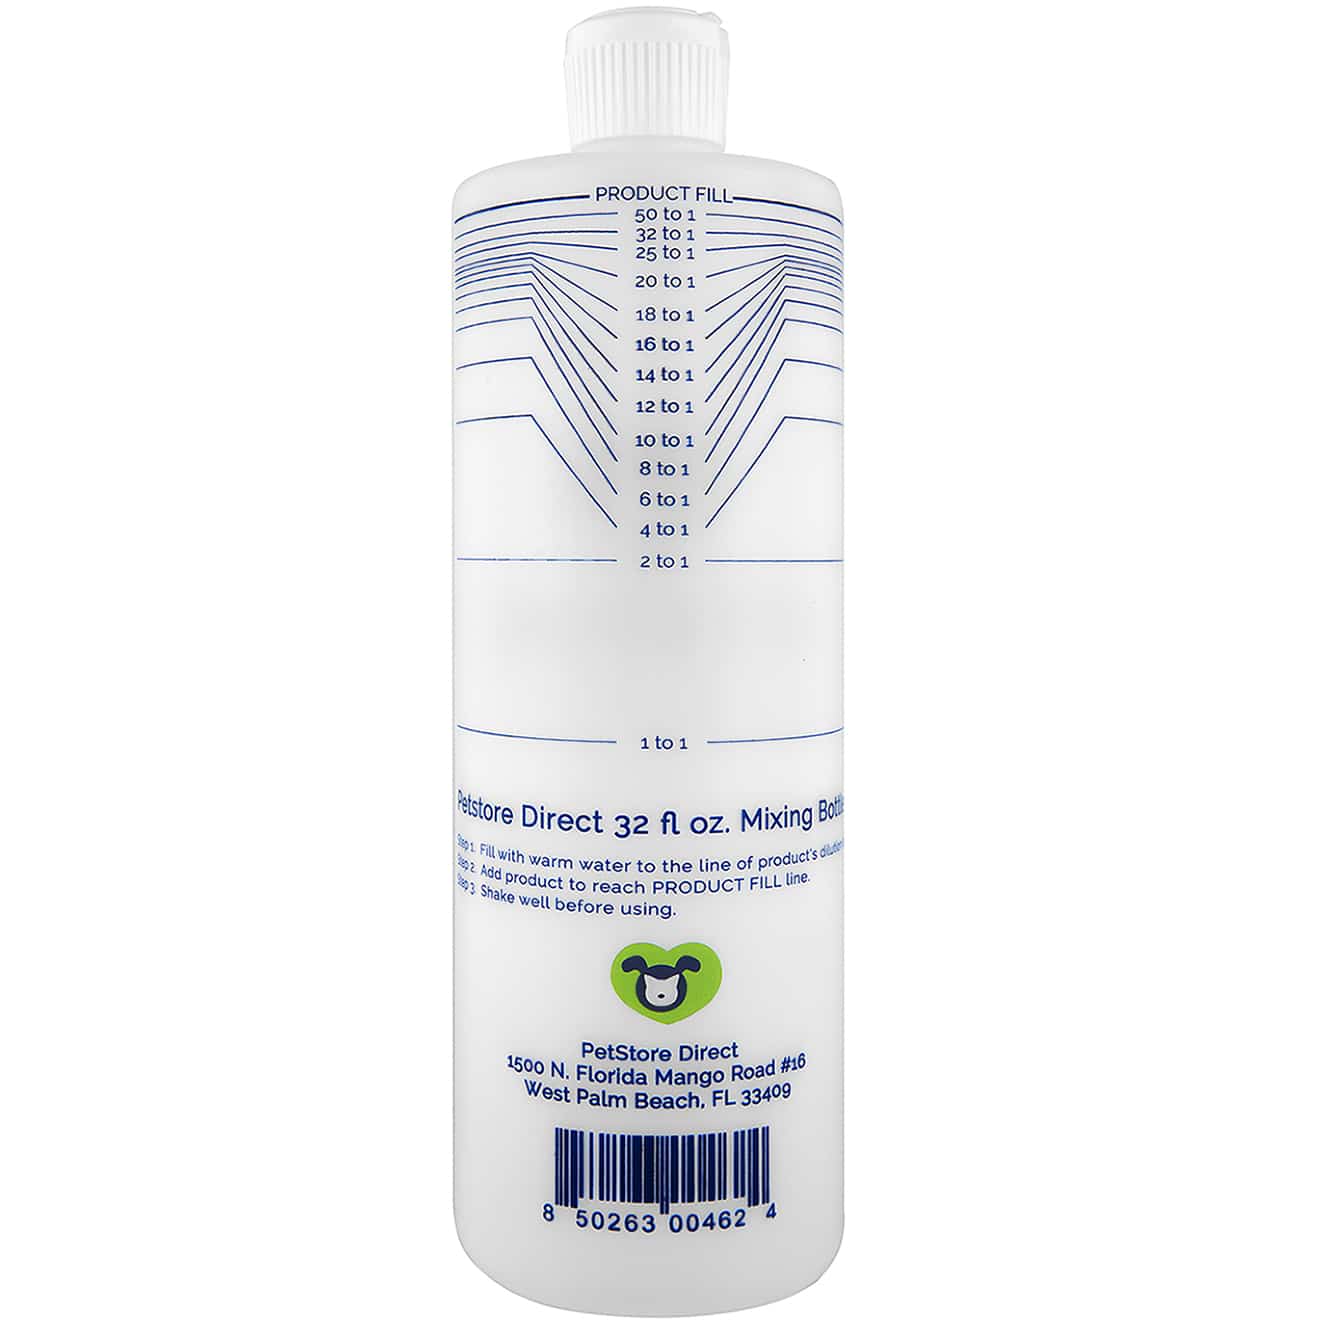 Mixing and Dilution Bottle 23 fl oz by